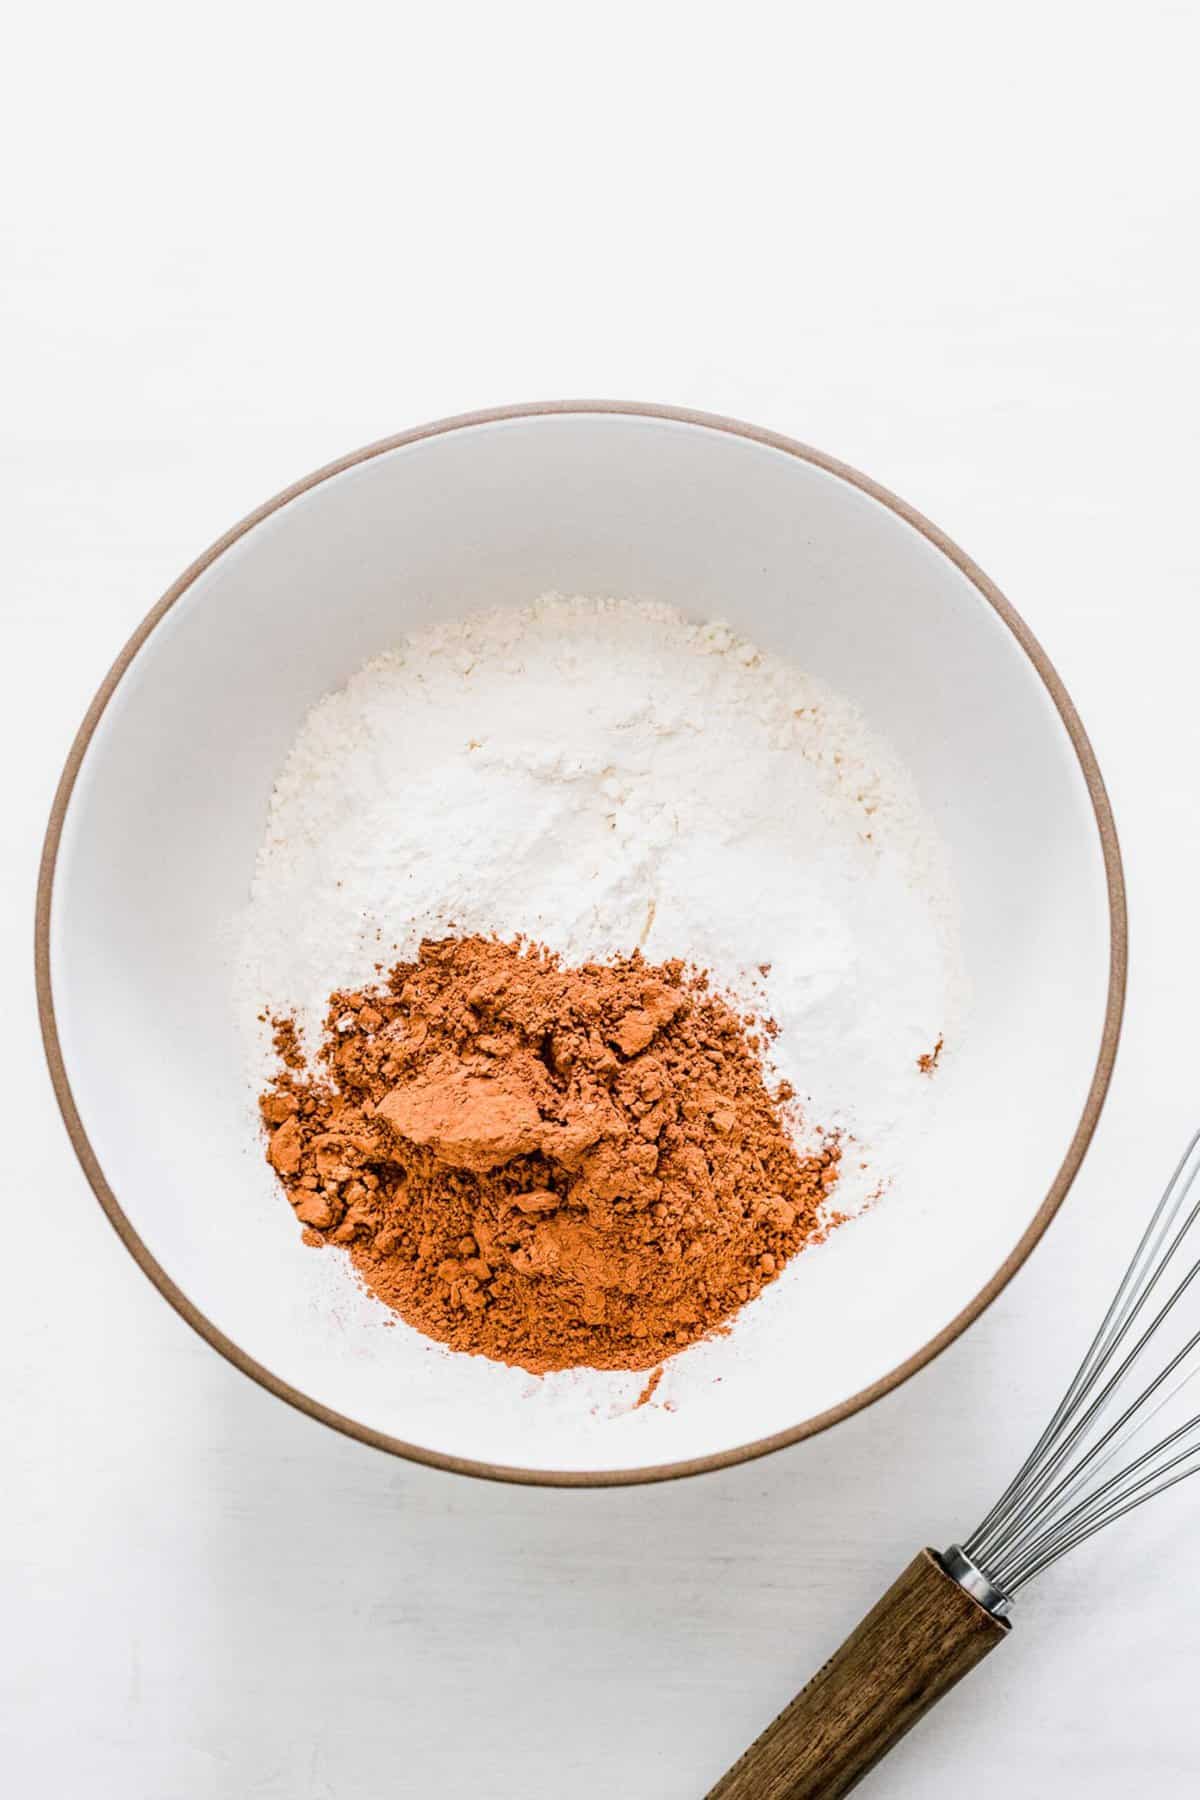 A mixing bowl with flour, cocoa powder, baking powder, and salt